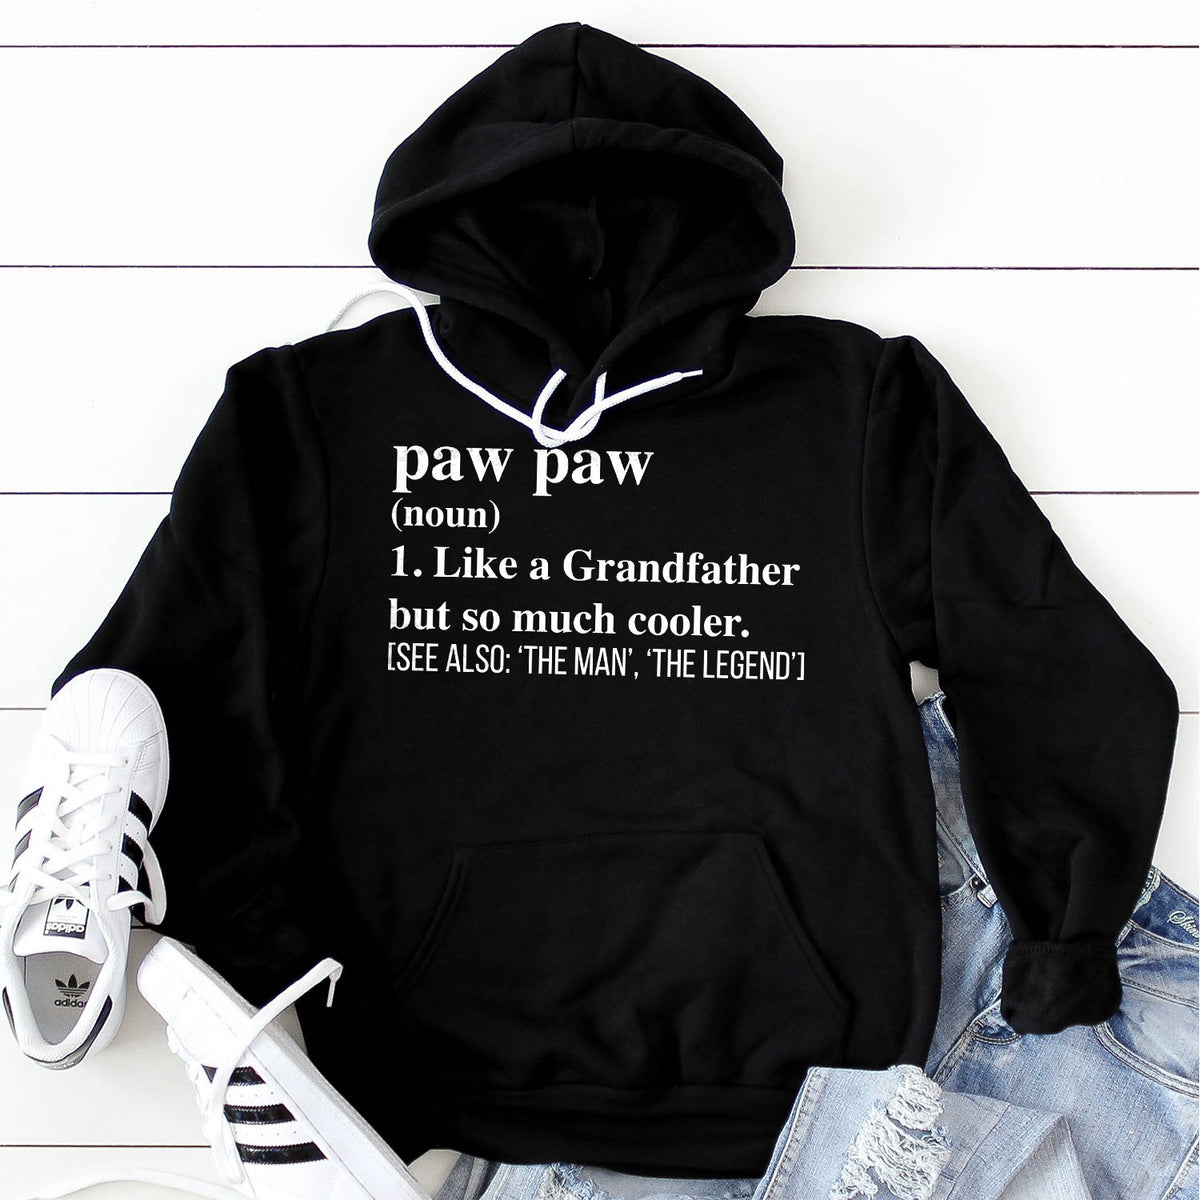 Paw Paw (Noun) 1. Like A Grandfather But So Much Cooler - Hoodie Sweatshirt